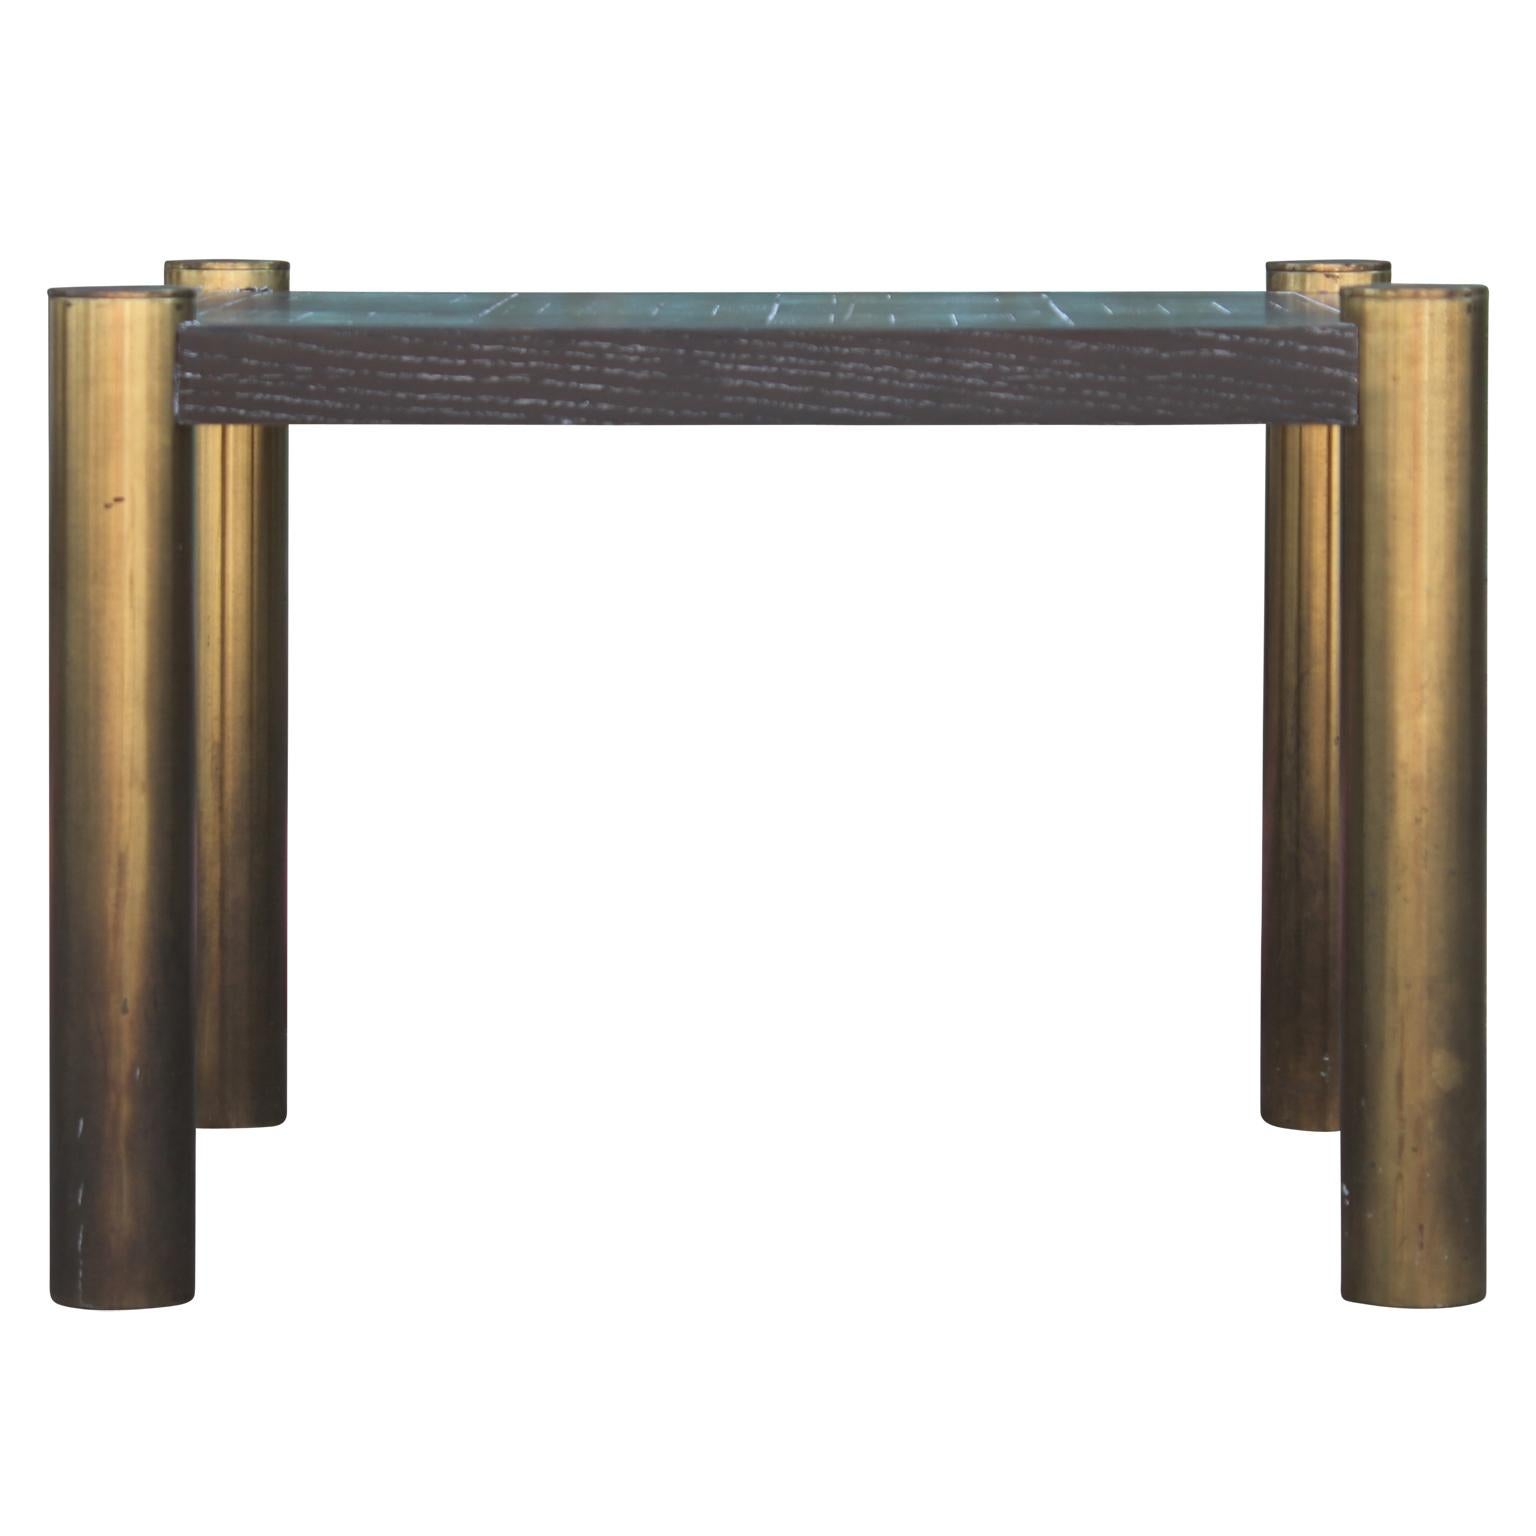 Pair of gorgeous modern brass side tables with a patterned cerused black top by Lane.